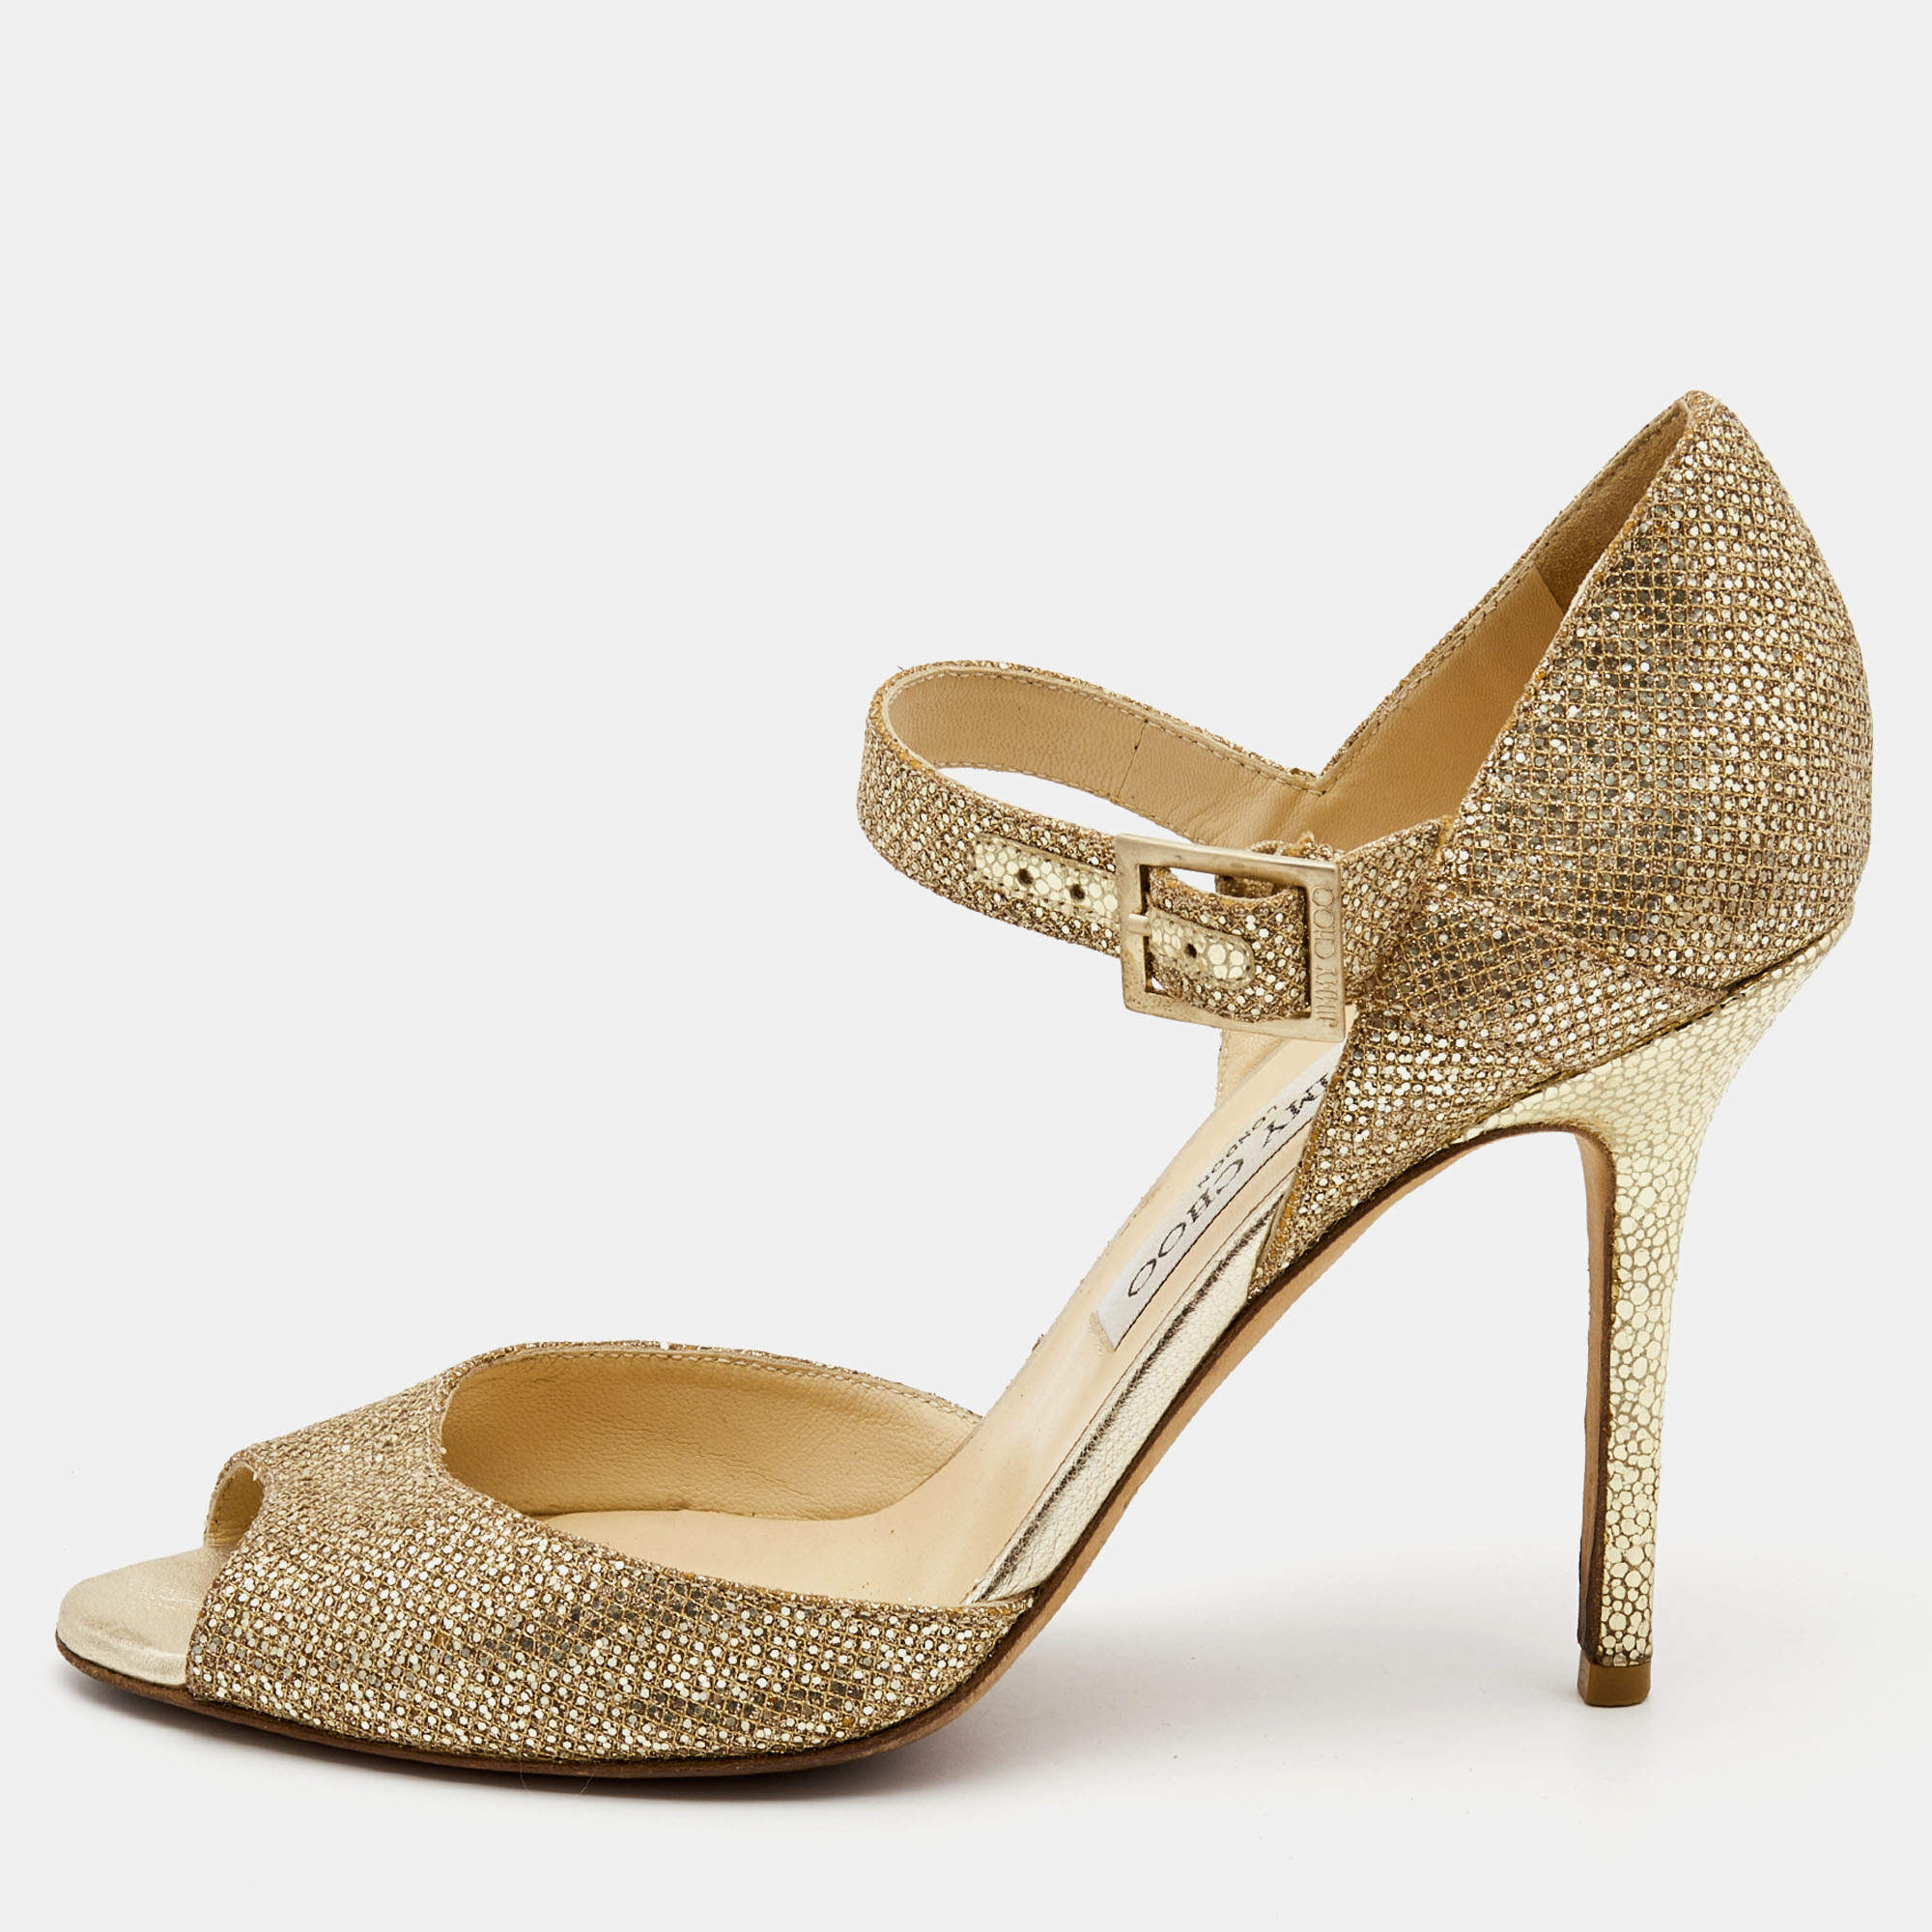 Jimmy Choo Gold Coarse Glitter Foil Leather Ankle Strap Sandals Size 39.5